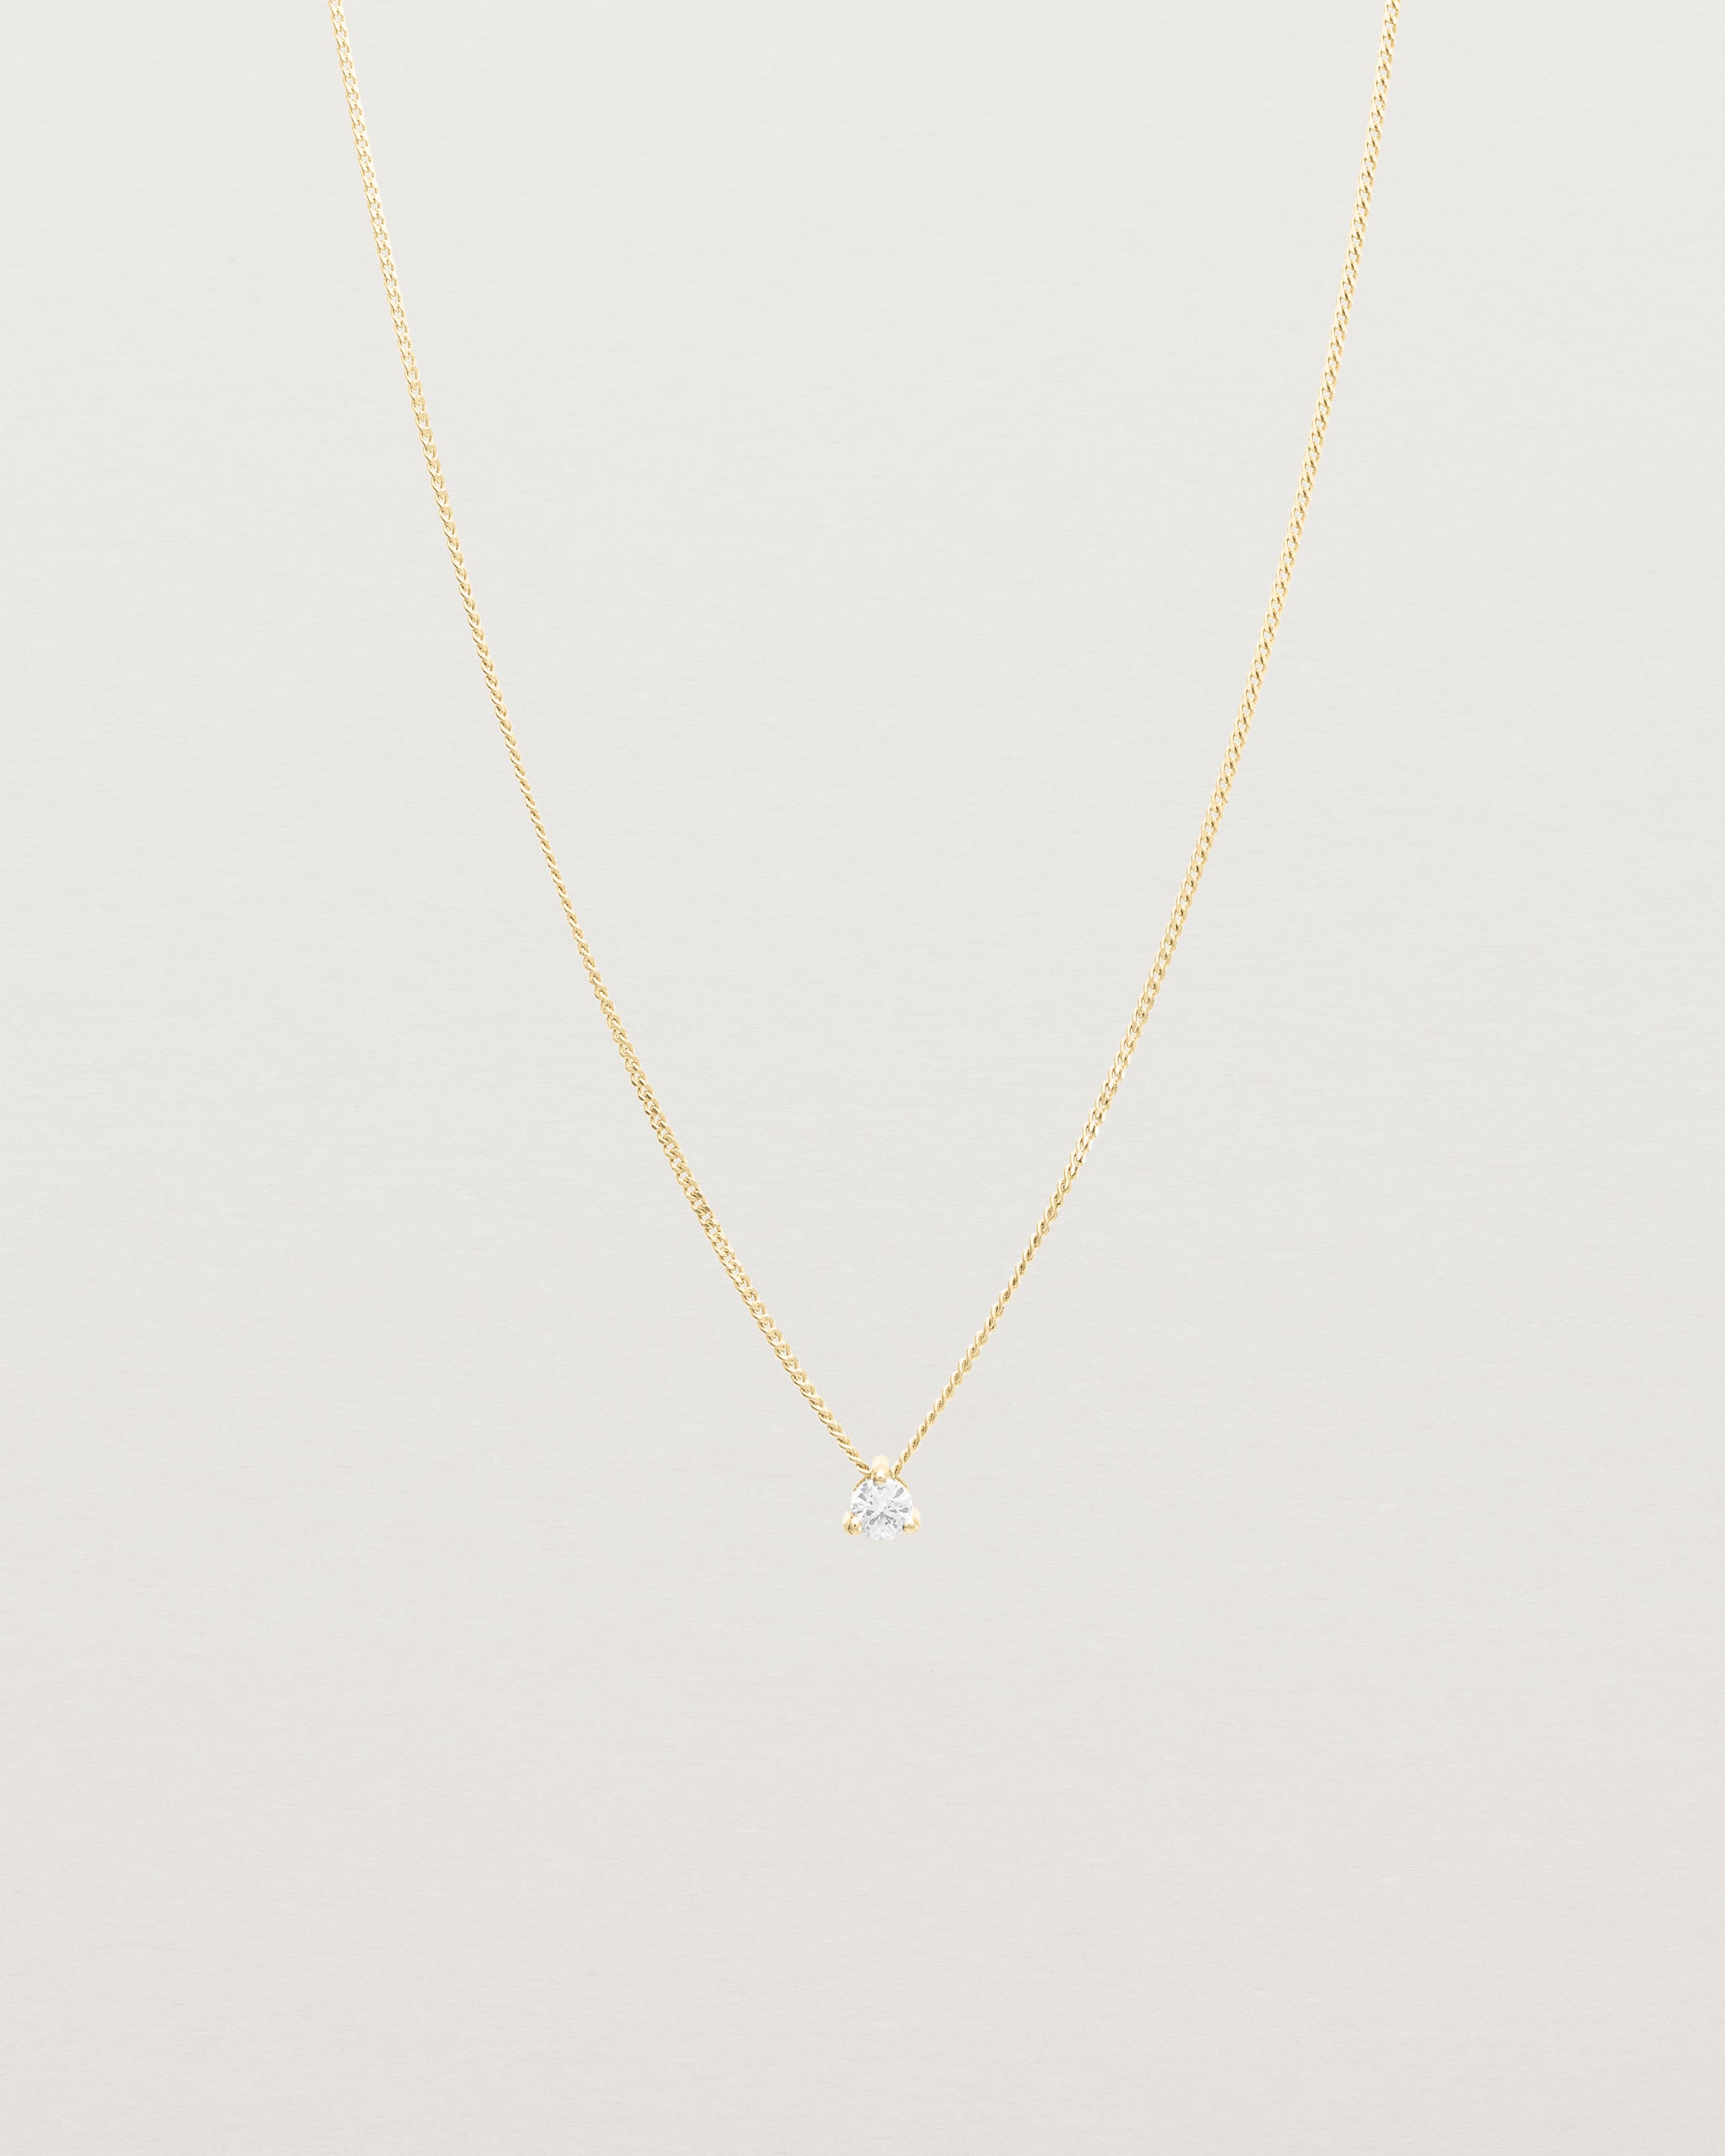 Full view of the Aiona Slider Necklace | Old Cut Diamond | Yellow Gold.